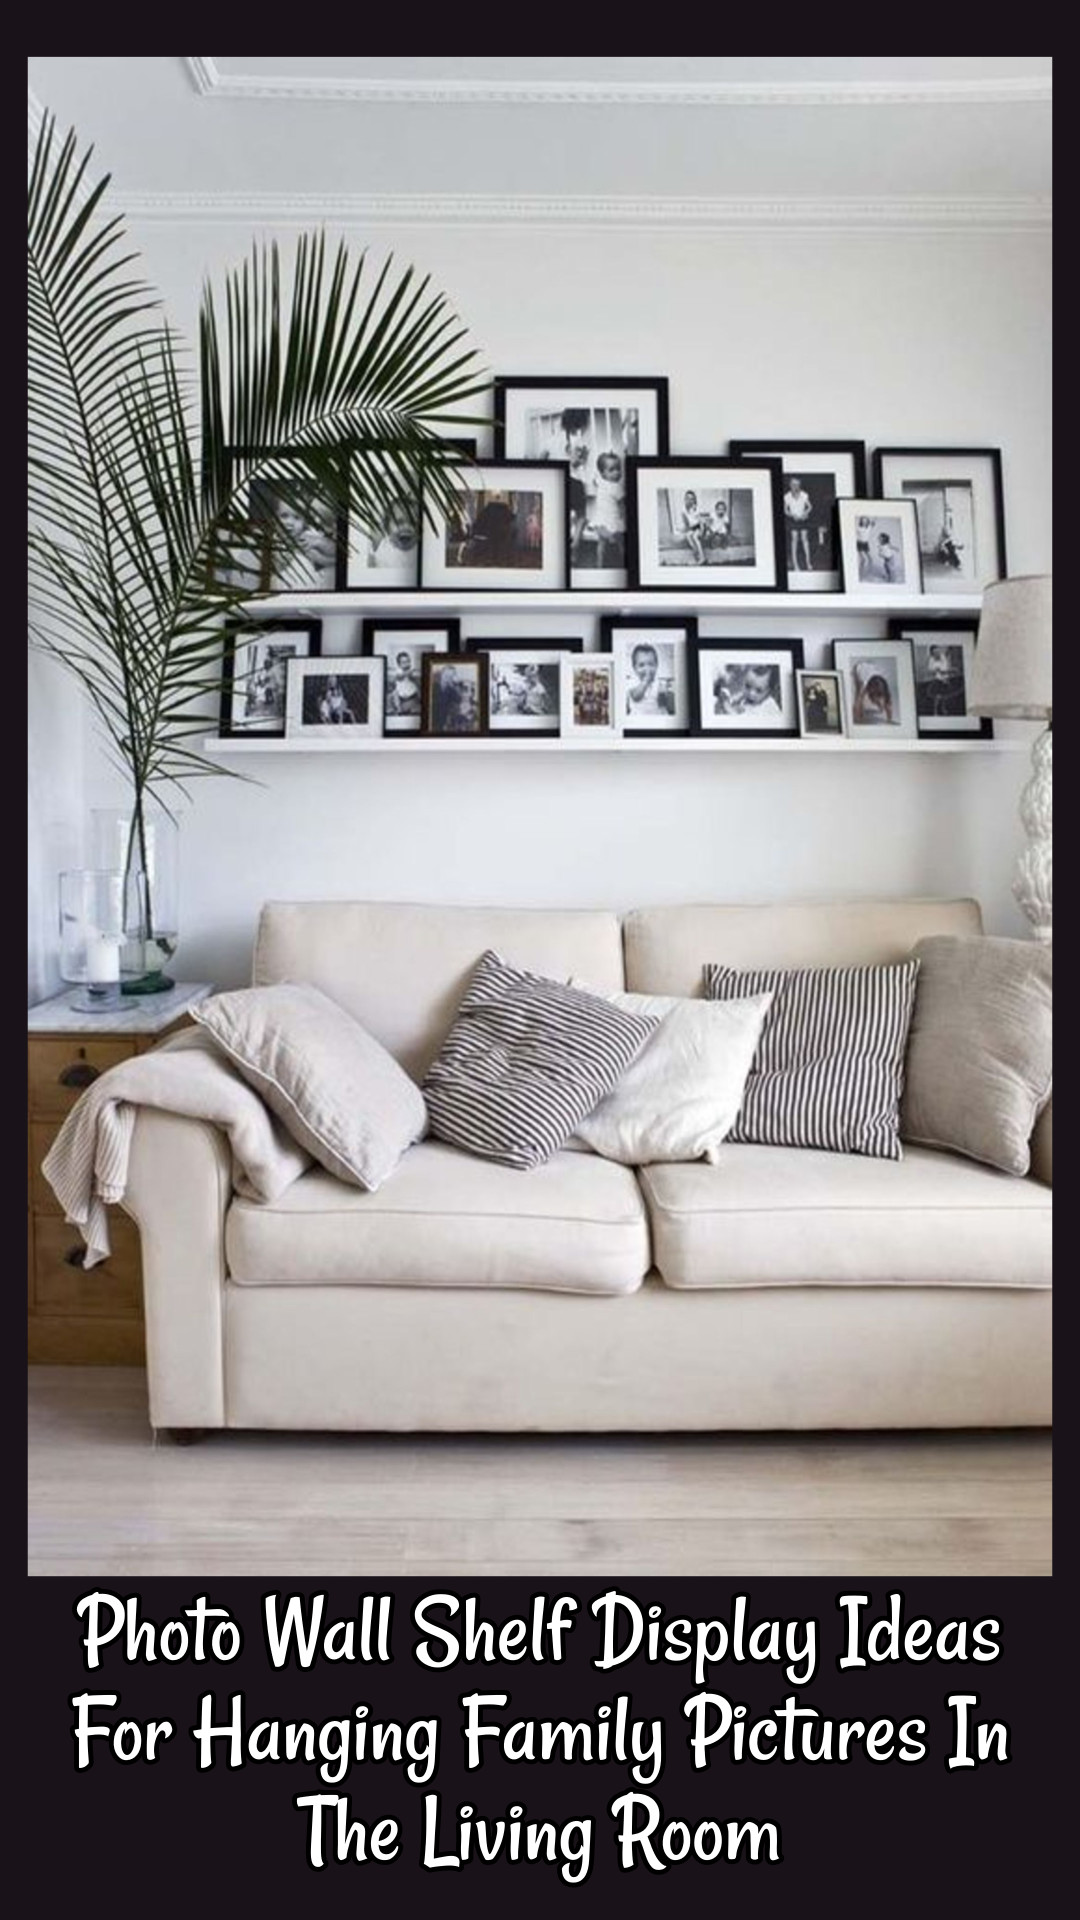 Photo wall shelf display ideas for hanging family pictures in the living room